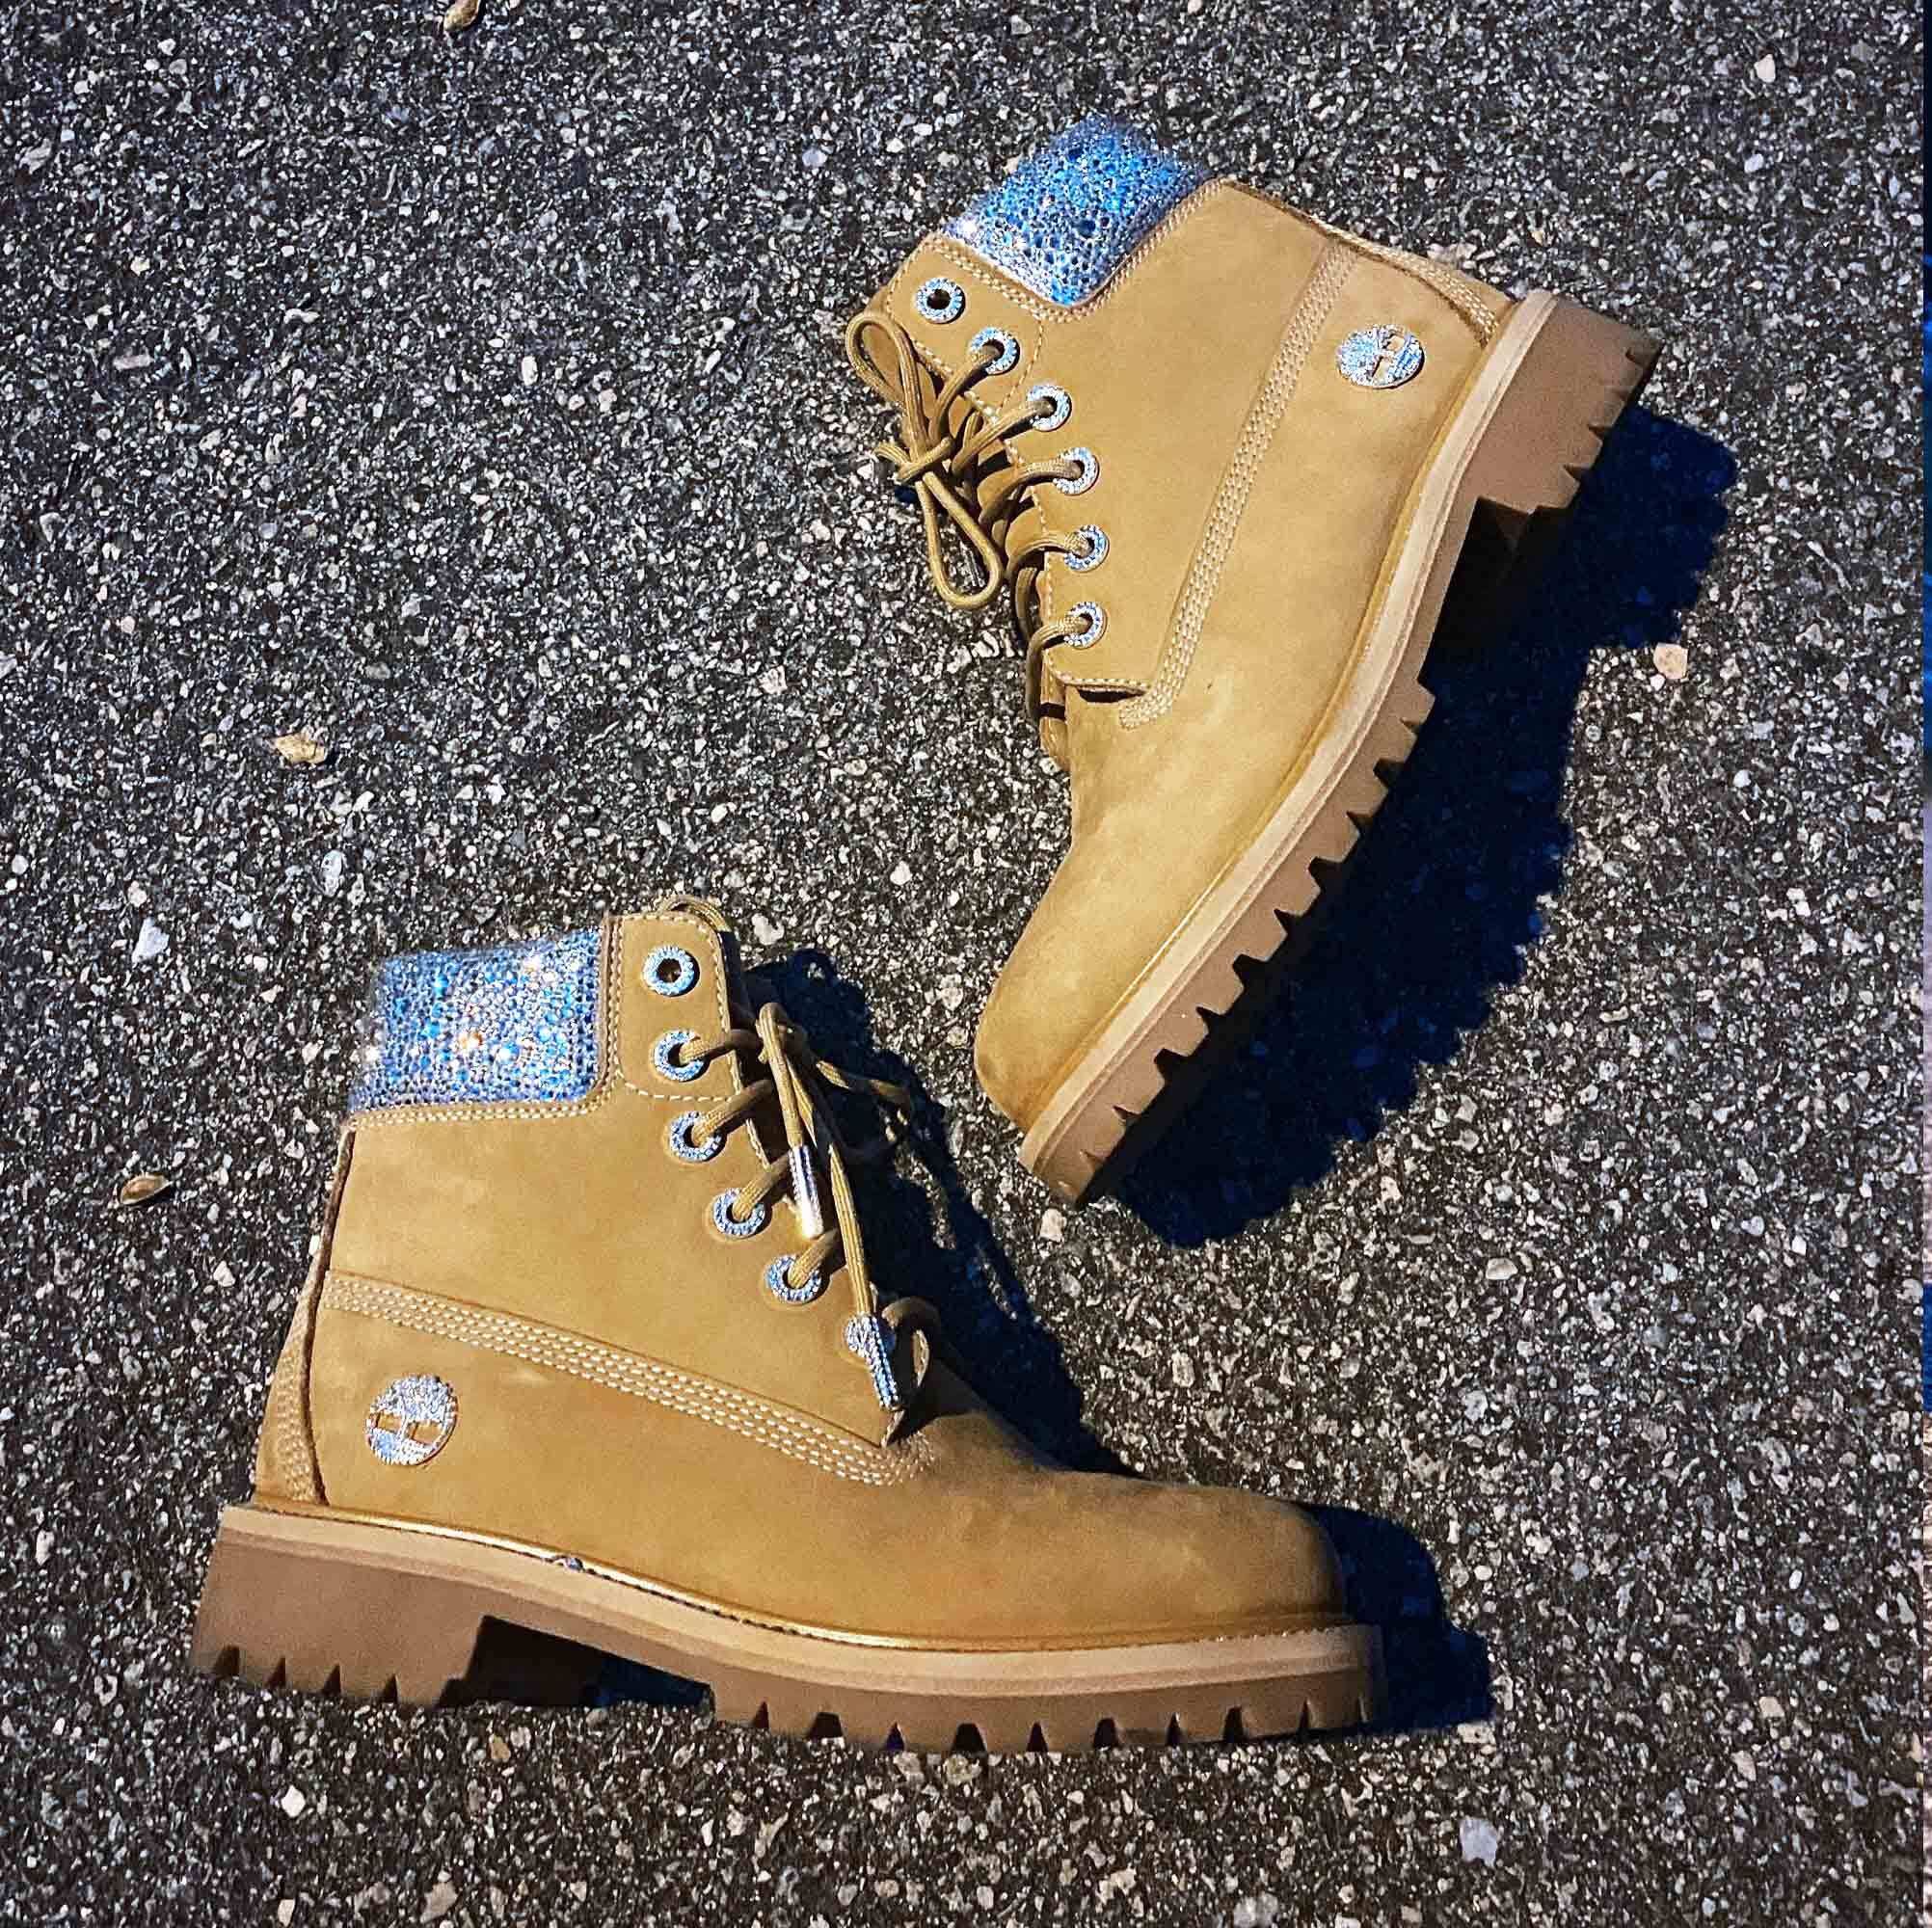 Supreme x Timberland Collaboration and Celebrities That Wear Timbs